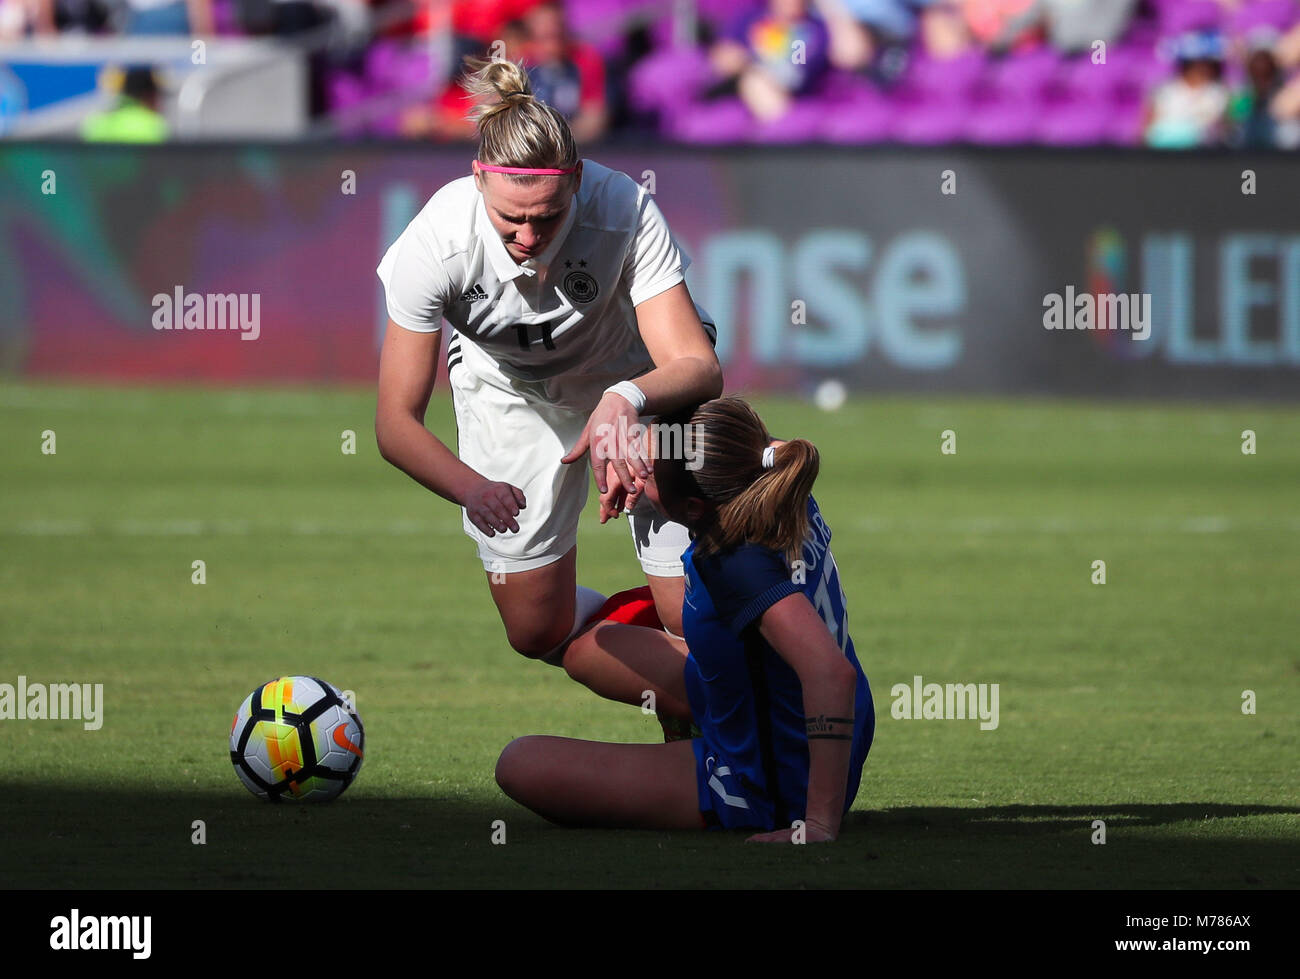 Orlando, Florida, USA. 7th Mar, 2018. Germany forward Alexandra Popp (11) falls over France defender Marion Torrent (17) as they battle for ball possession during the first half of the SheBelieves Cup women's soccer match between the German Women's National Team and the French Women's National Team at the Orlando City Stadium in Orlando, Florida. Credit: Mario Houben/ZUMA Wire/Alamy Live News Stock Photo